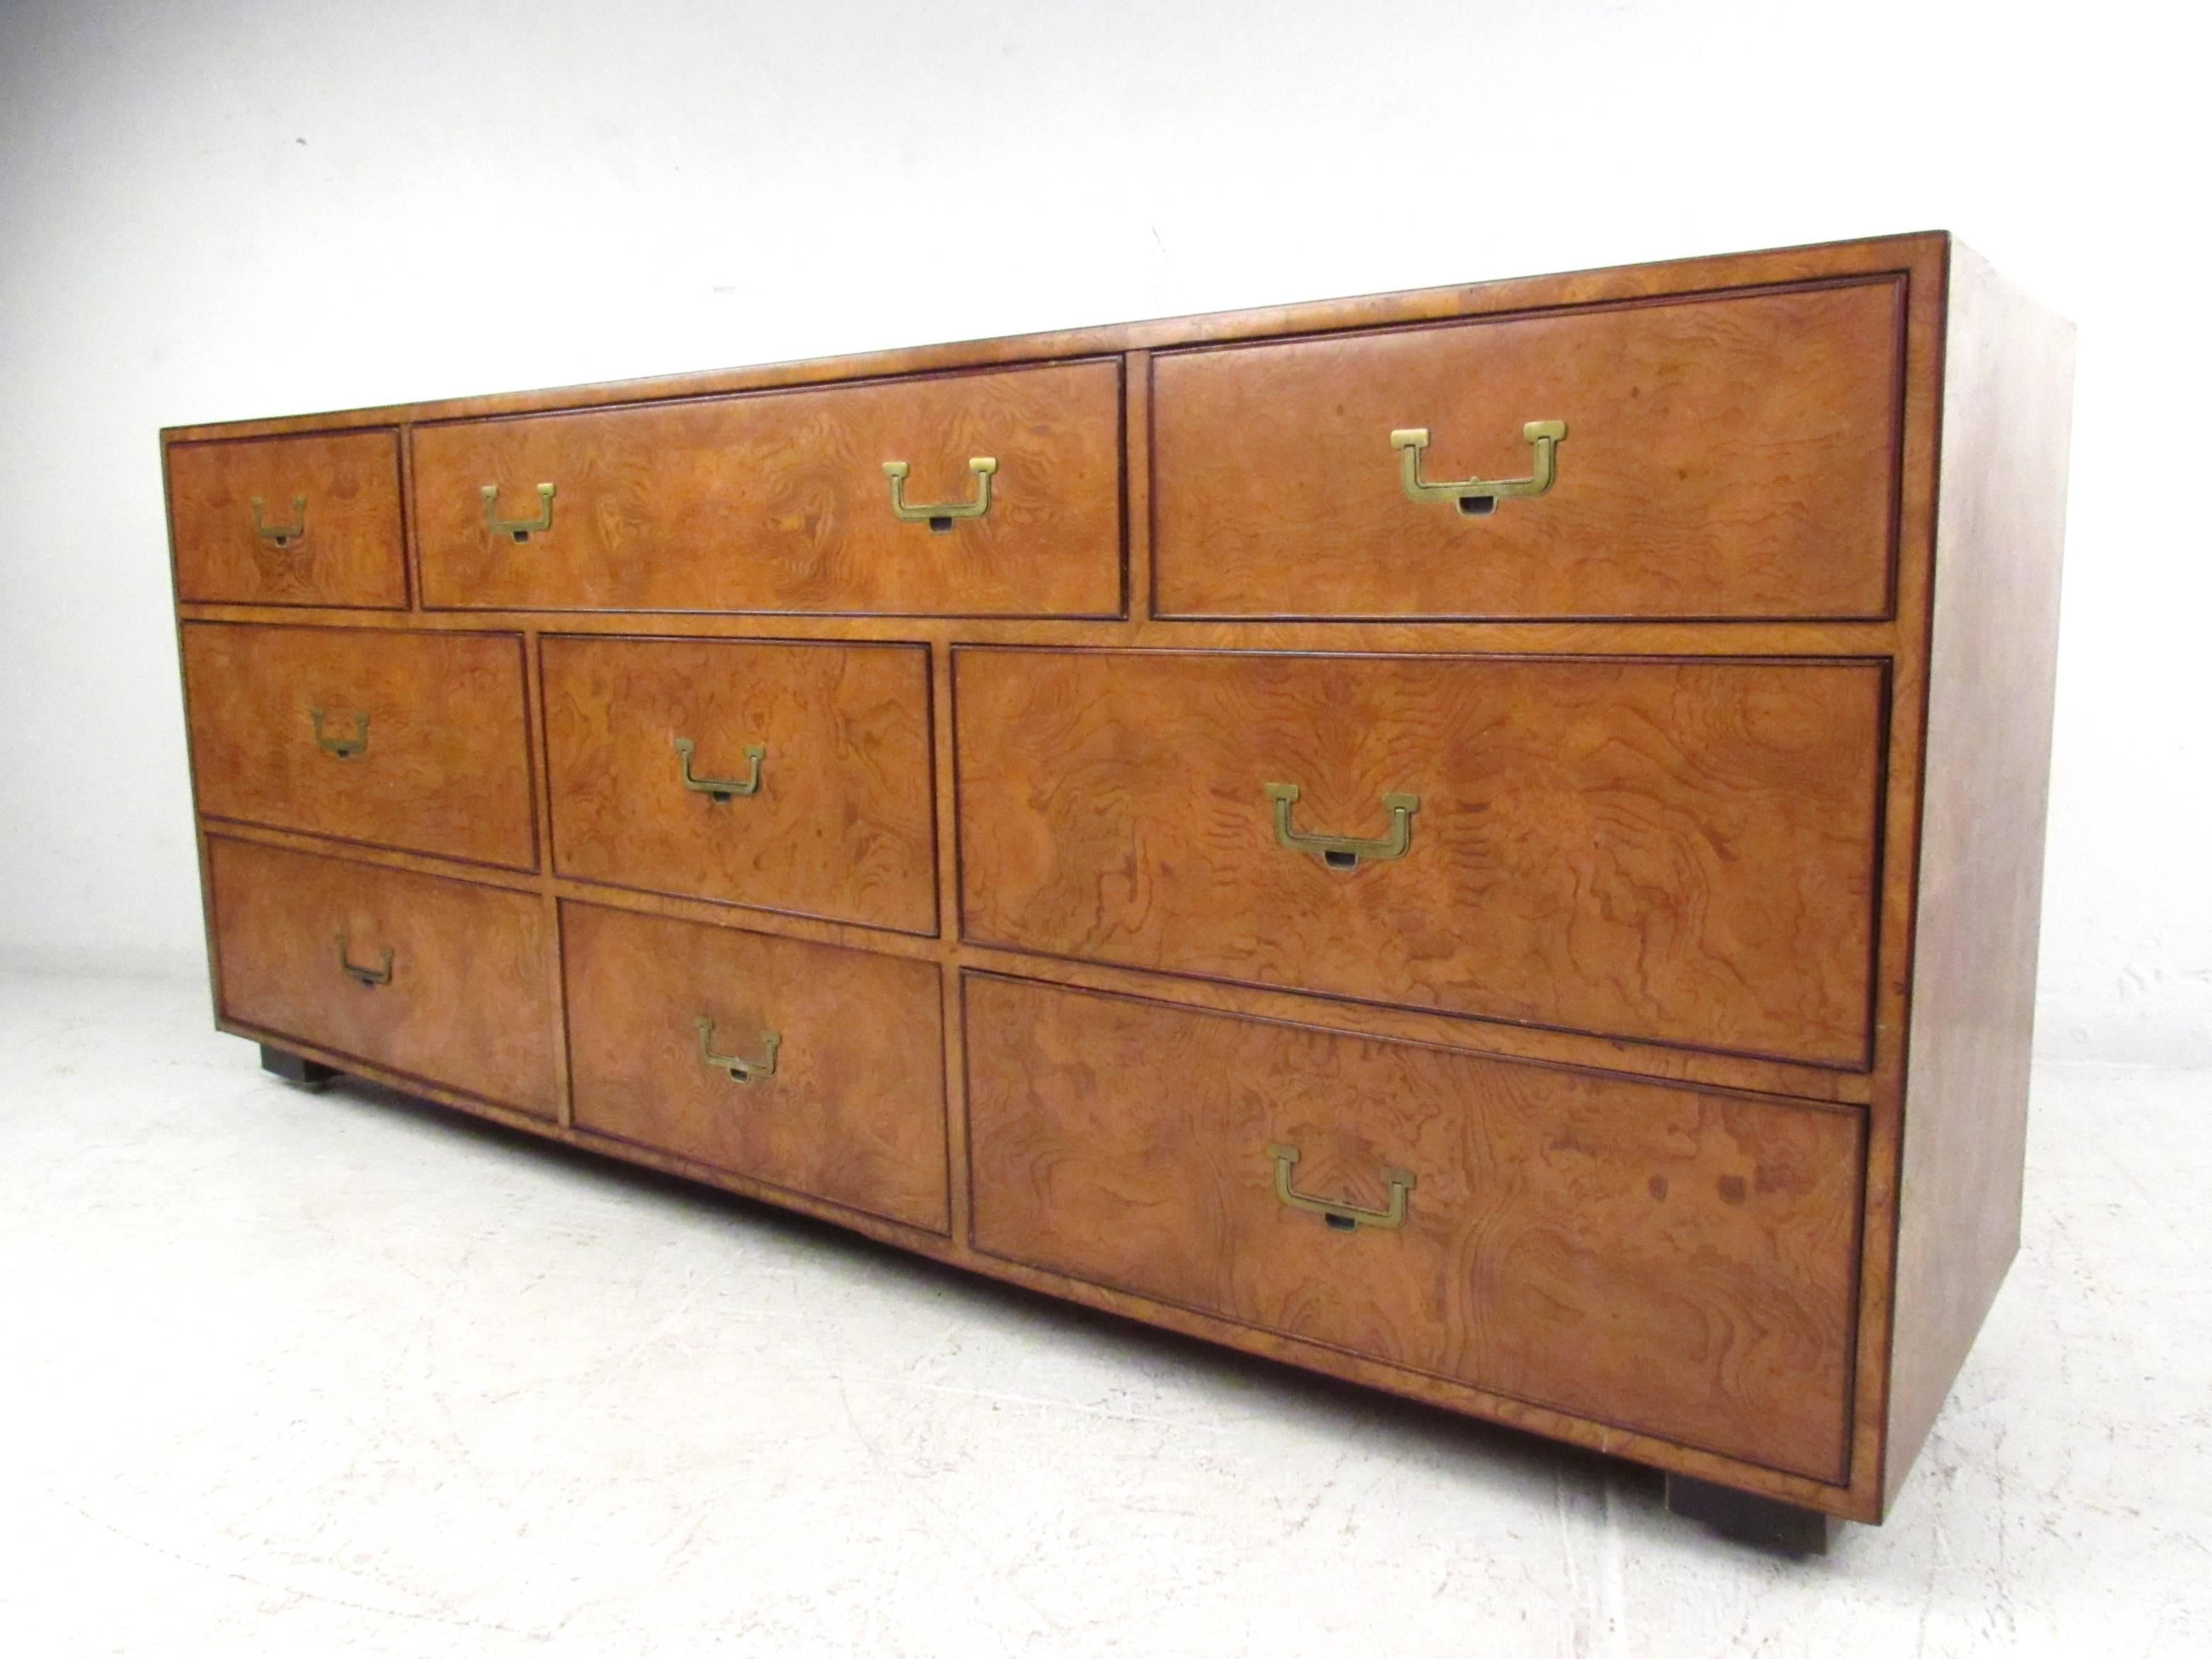 This beautiful vintage burl wood dresser features nine different sized drawers, complete with brass Campaign style handles. Stunning vintage finish is complimented by the unique lines of the piece, original manufacturer's label in drawer. Please